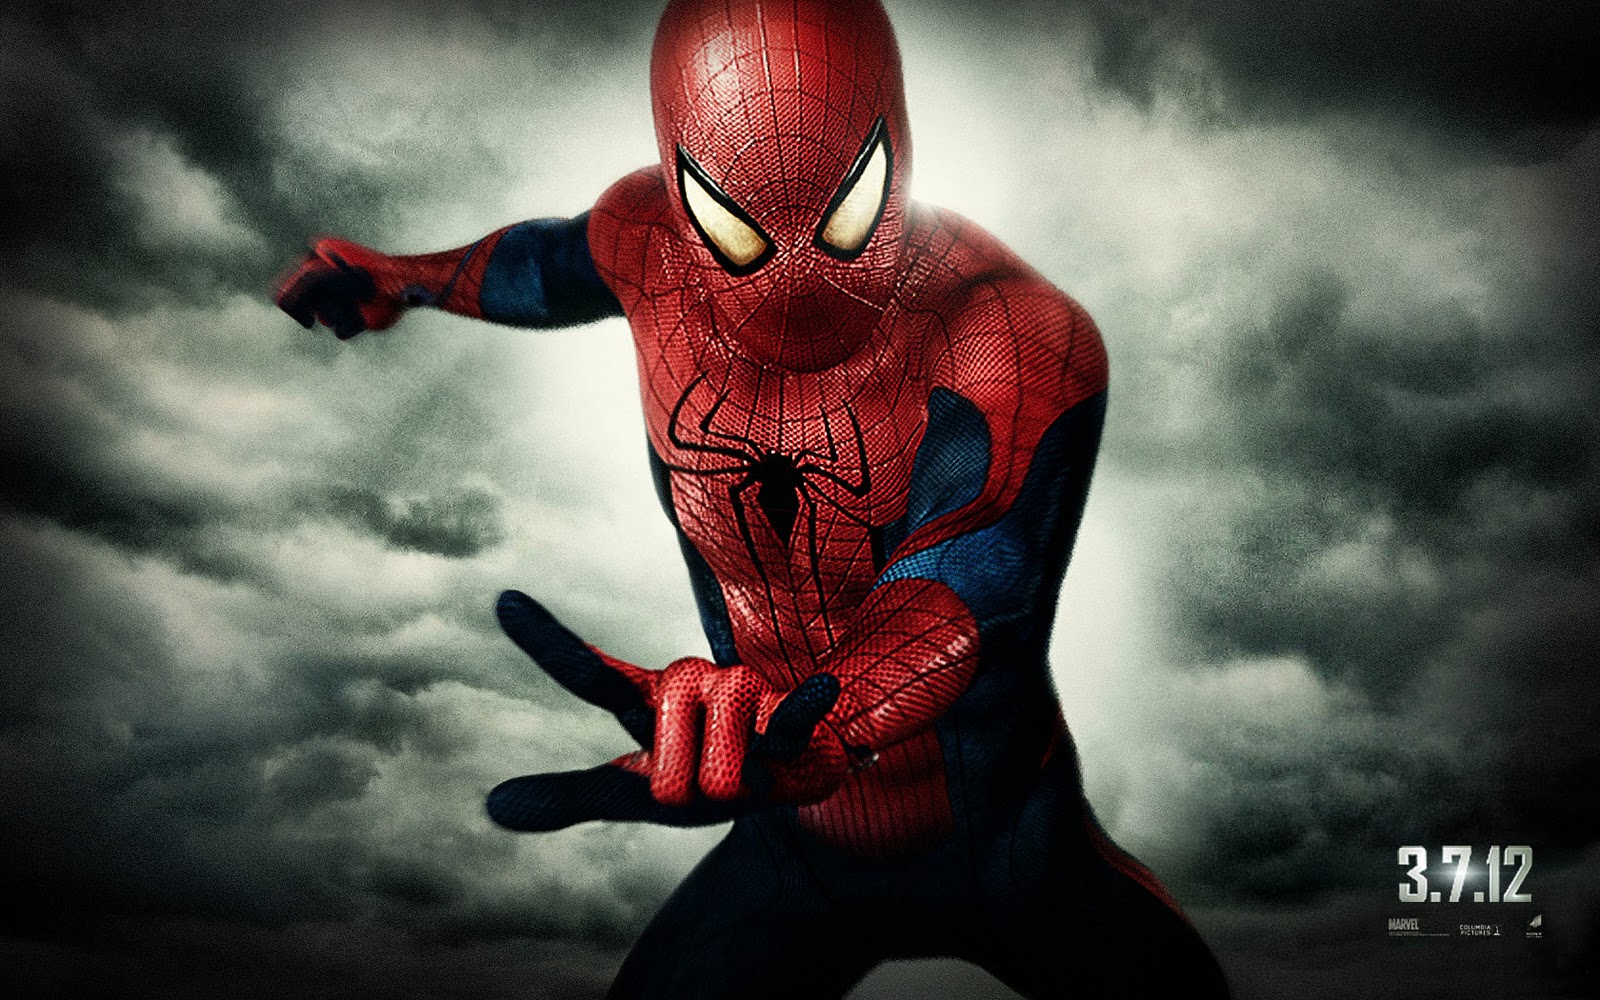 The Amazing Spider Man Movie New HD Wallpapers 2012 | Hollywood